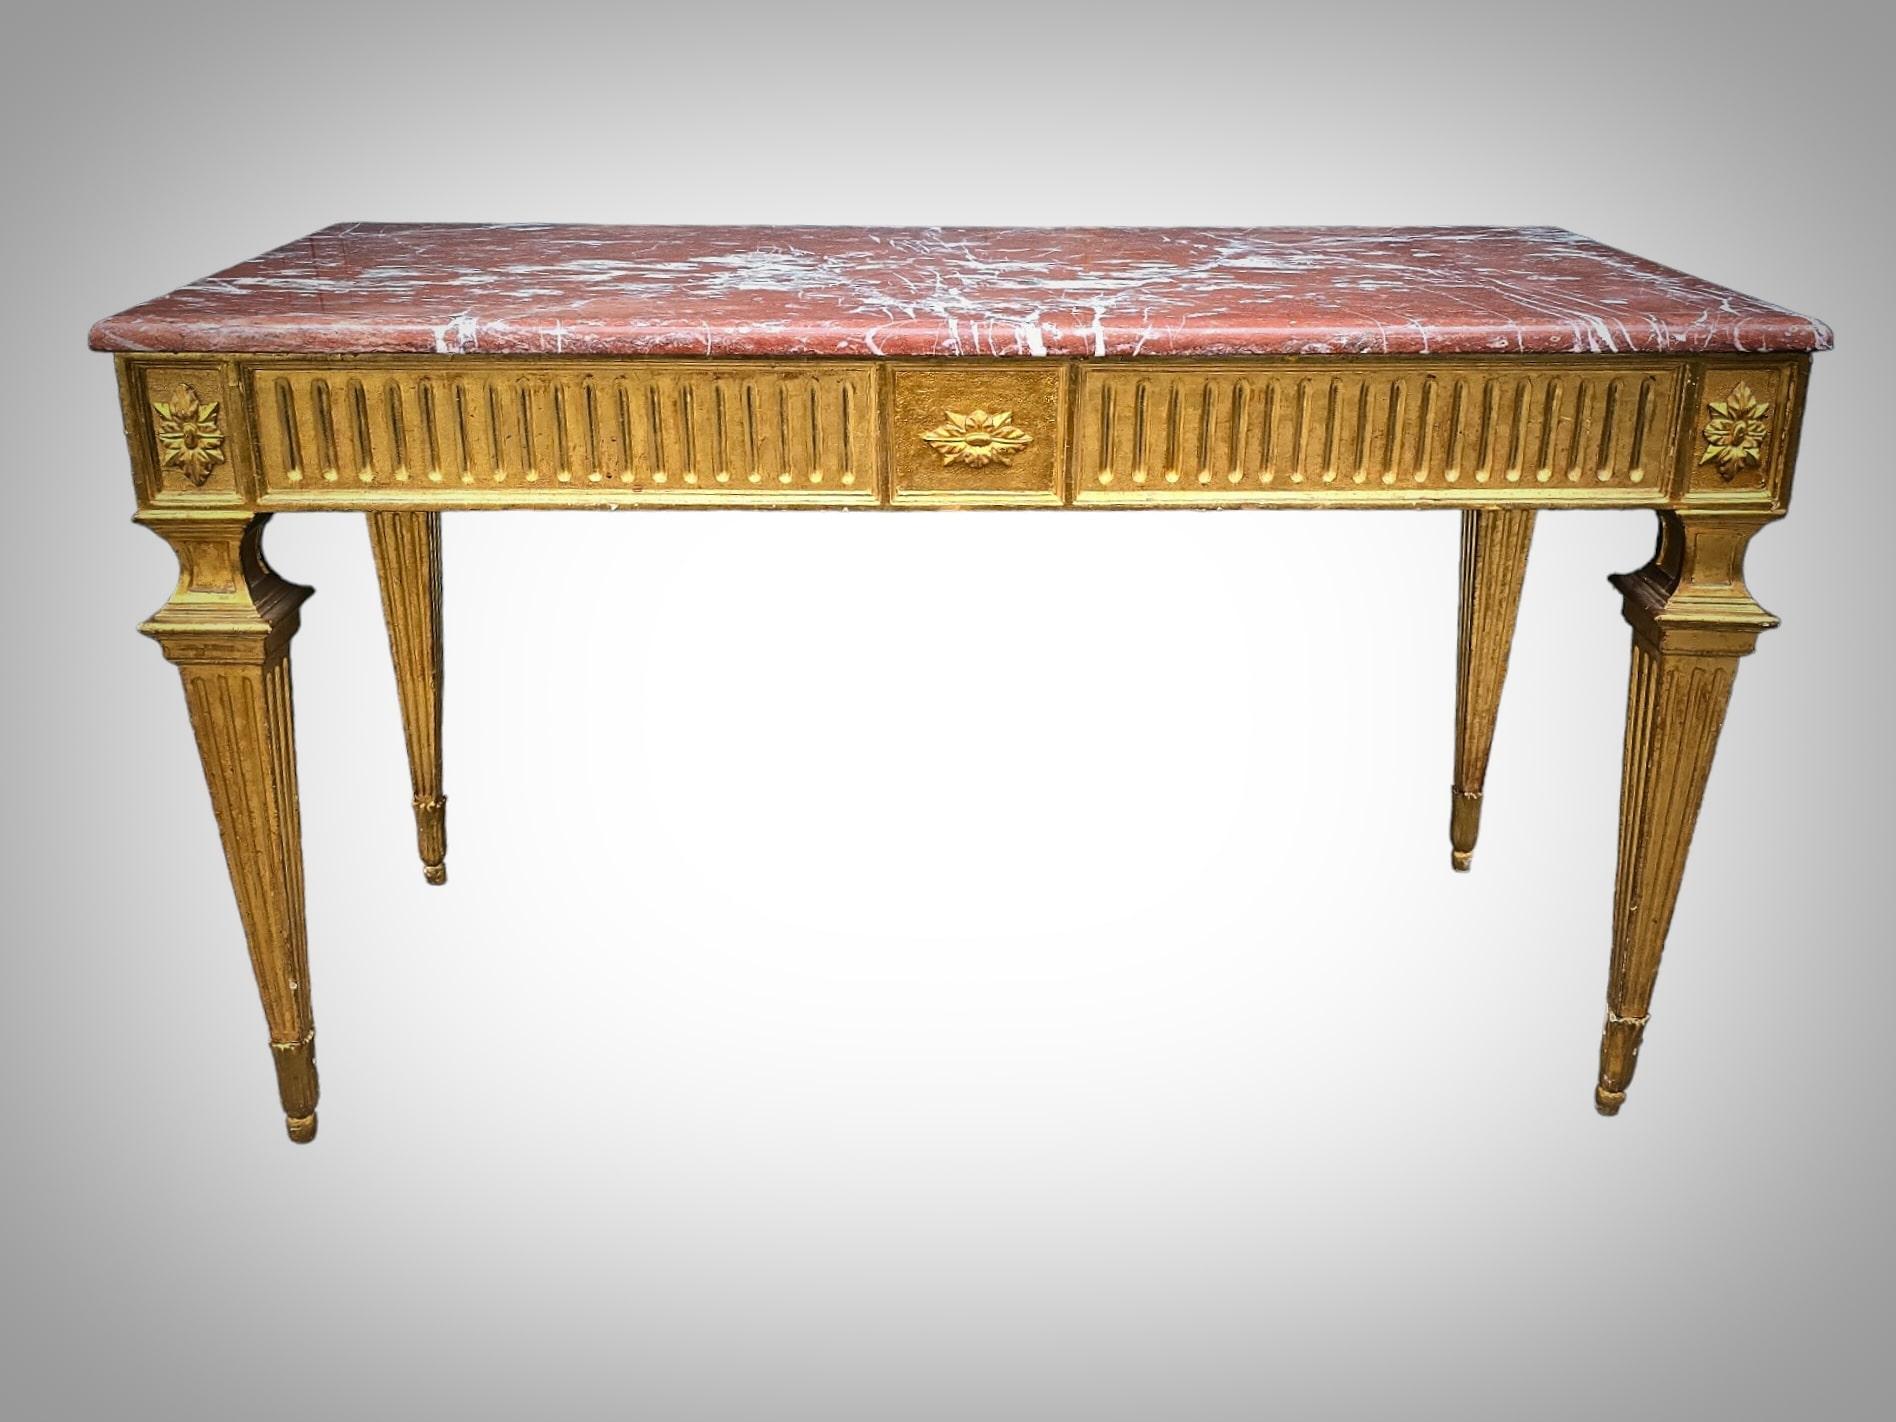 Louis XVI Period Gilded Carved Wood Console Table 18 th In Good Condition For Sale In Madrid, ES